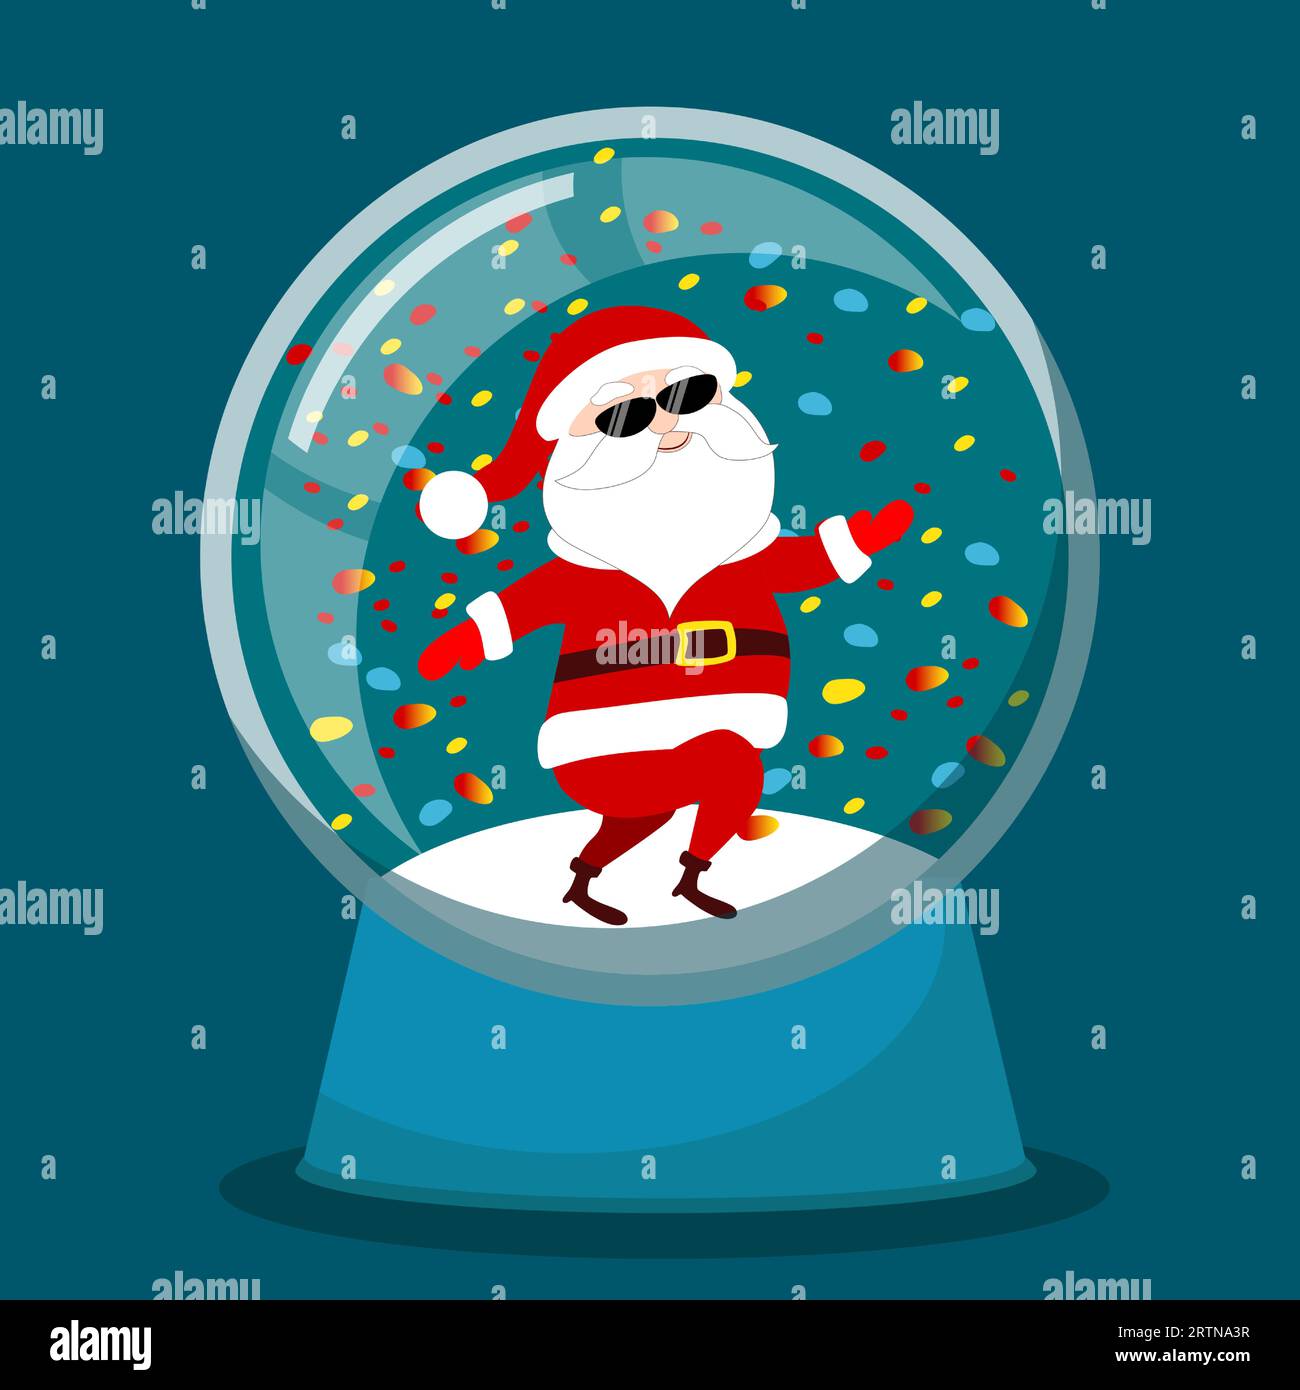 A glass snow globe with Santa inside, who is very cheerful, bouncing or dancing, wearing sunglasses. The mood of joy, delight and fun. Vector cartoon Stock Vector